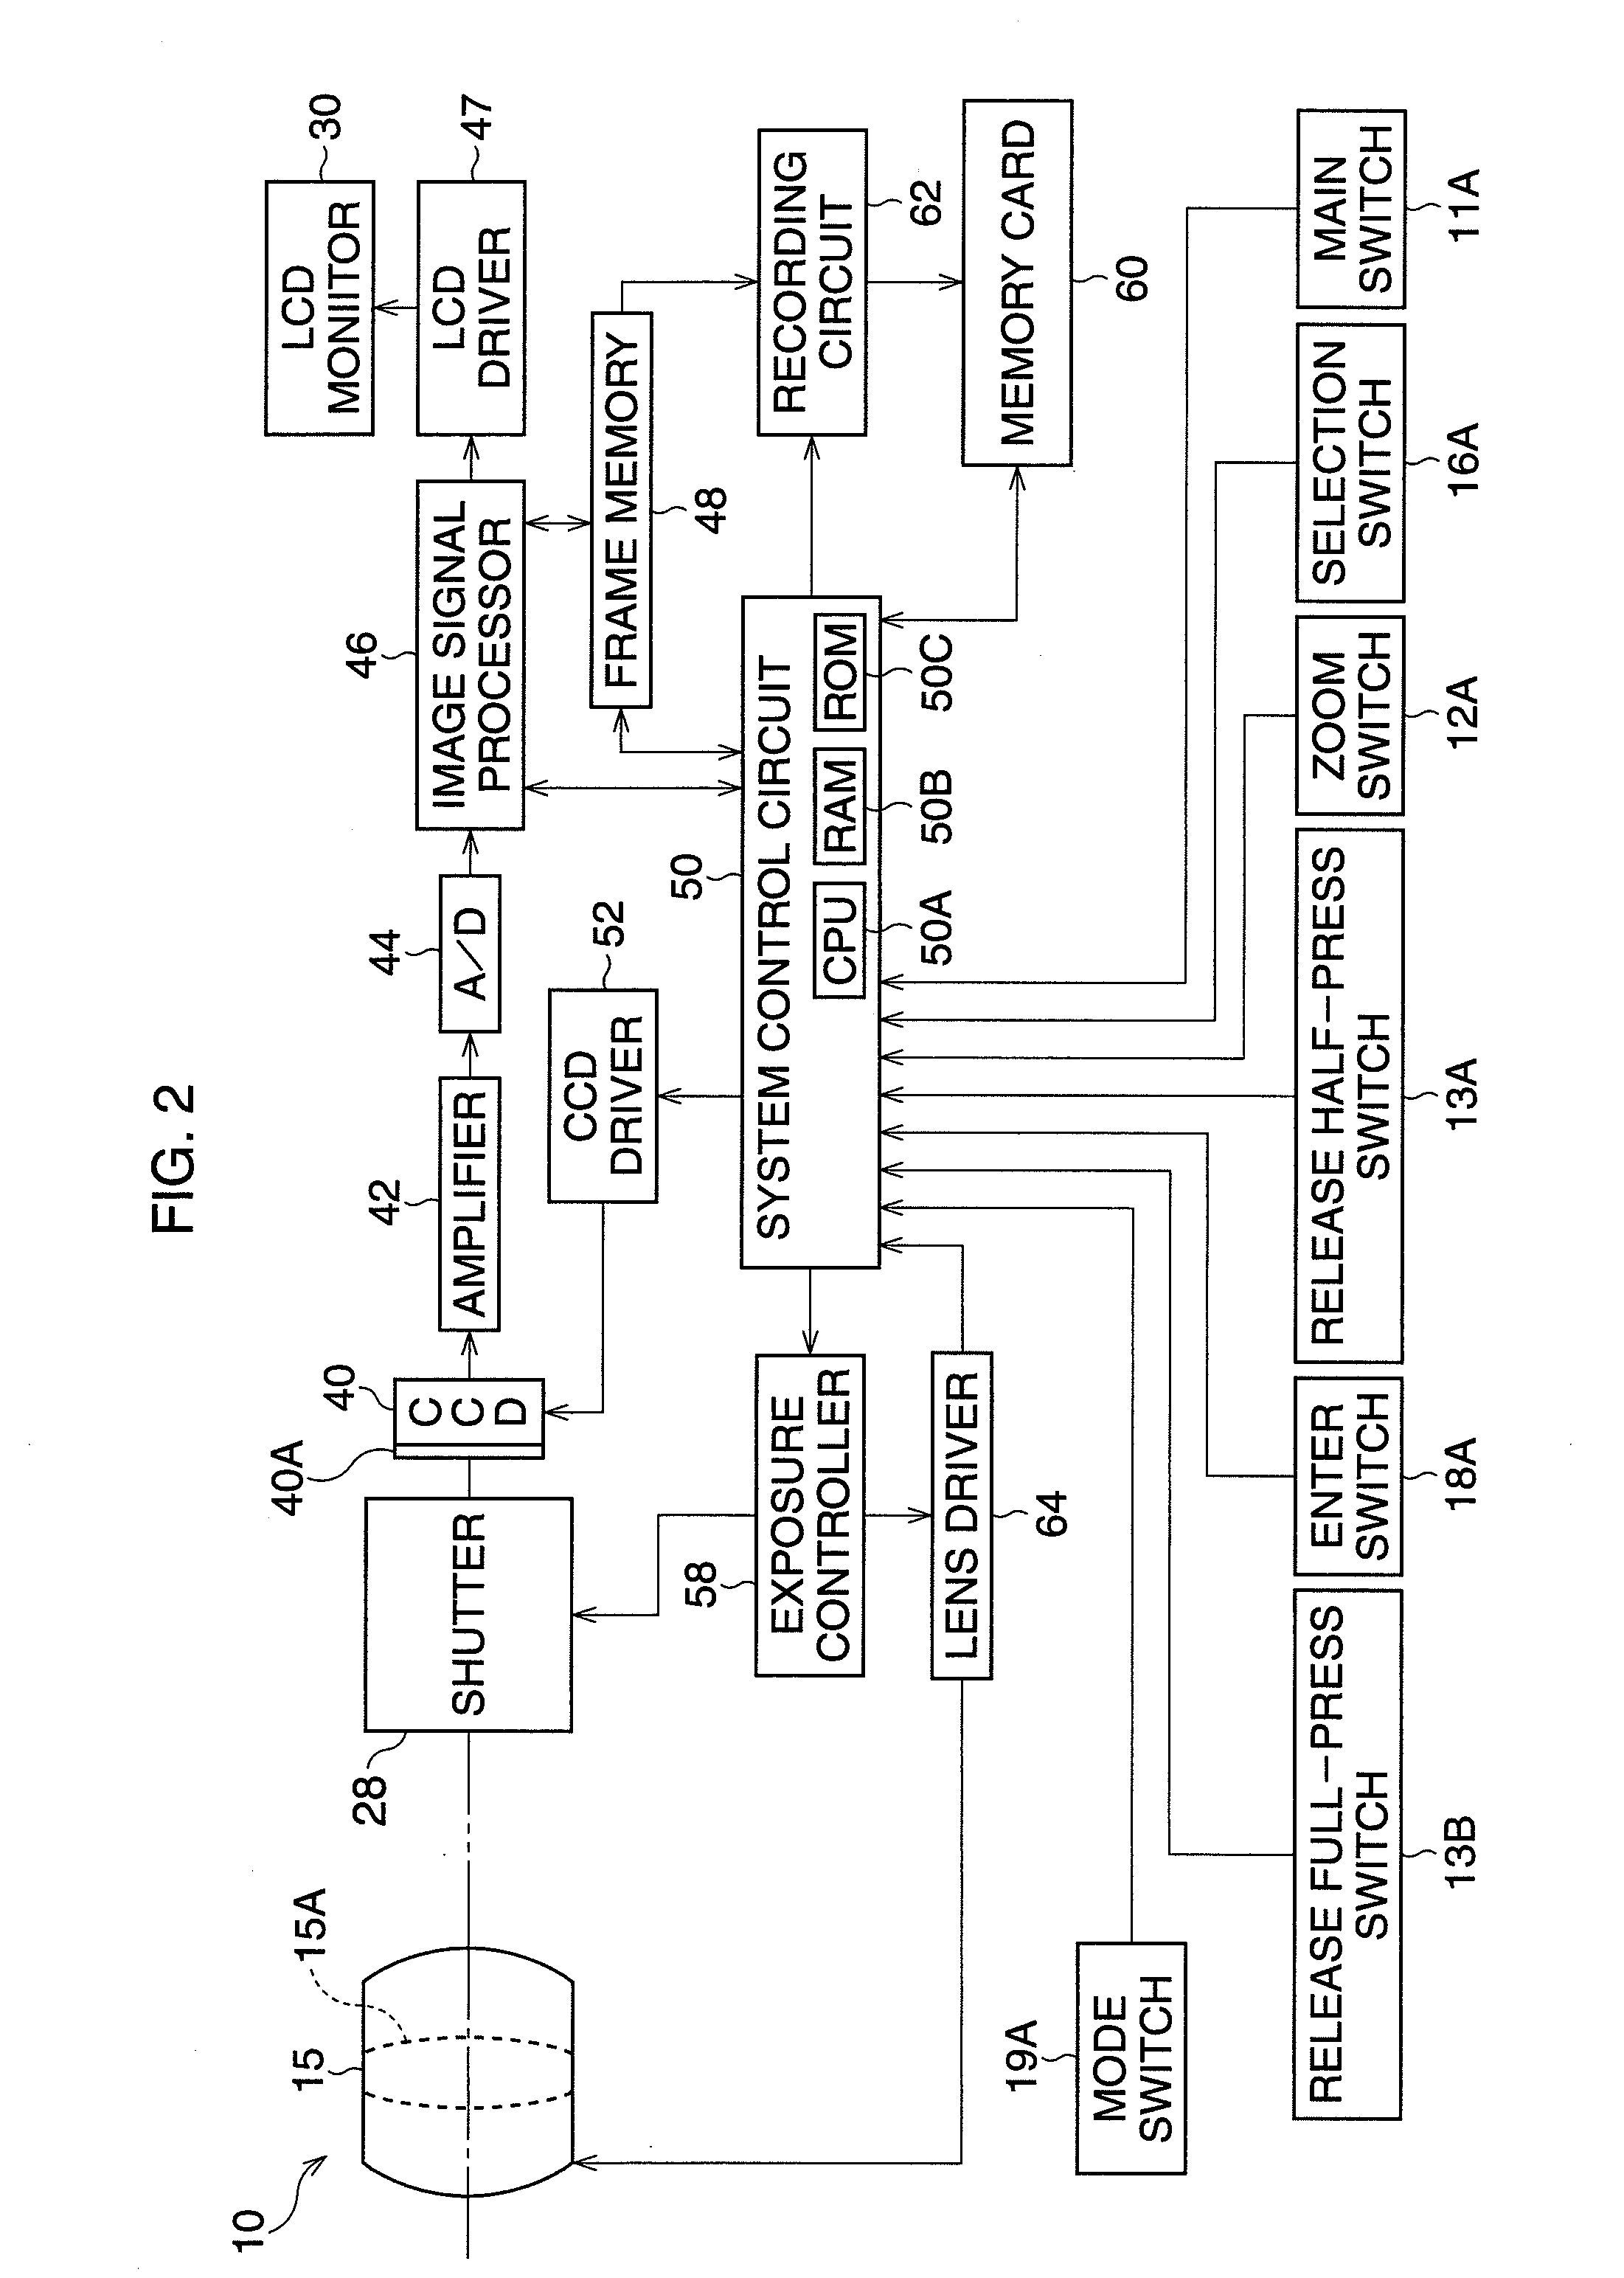 Method and apparatus for recording image data